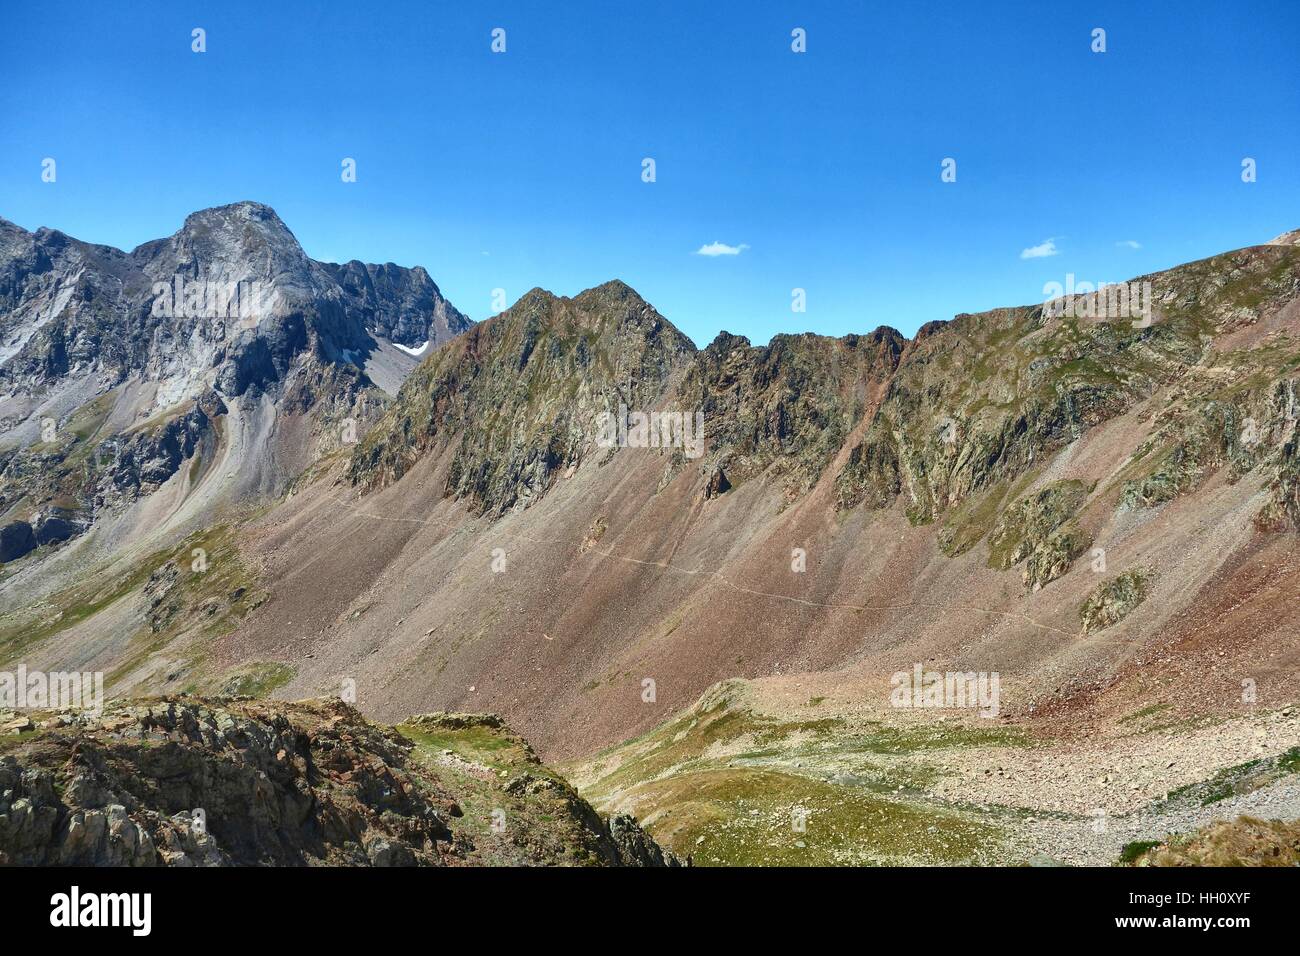 Mountain view: a footpath traverses the scree along the side of the Rio Ara valley in the Spanish Pyrenees. Stock Photo